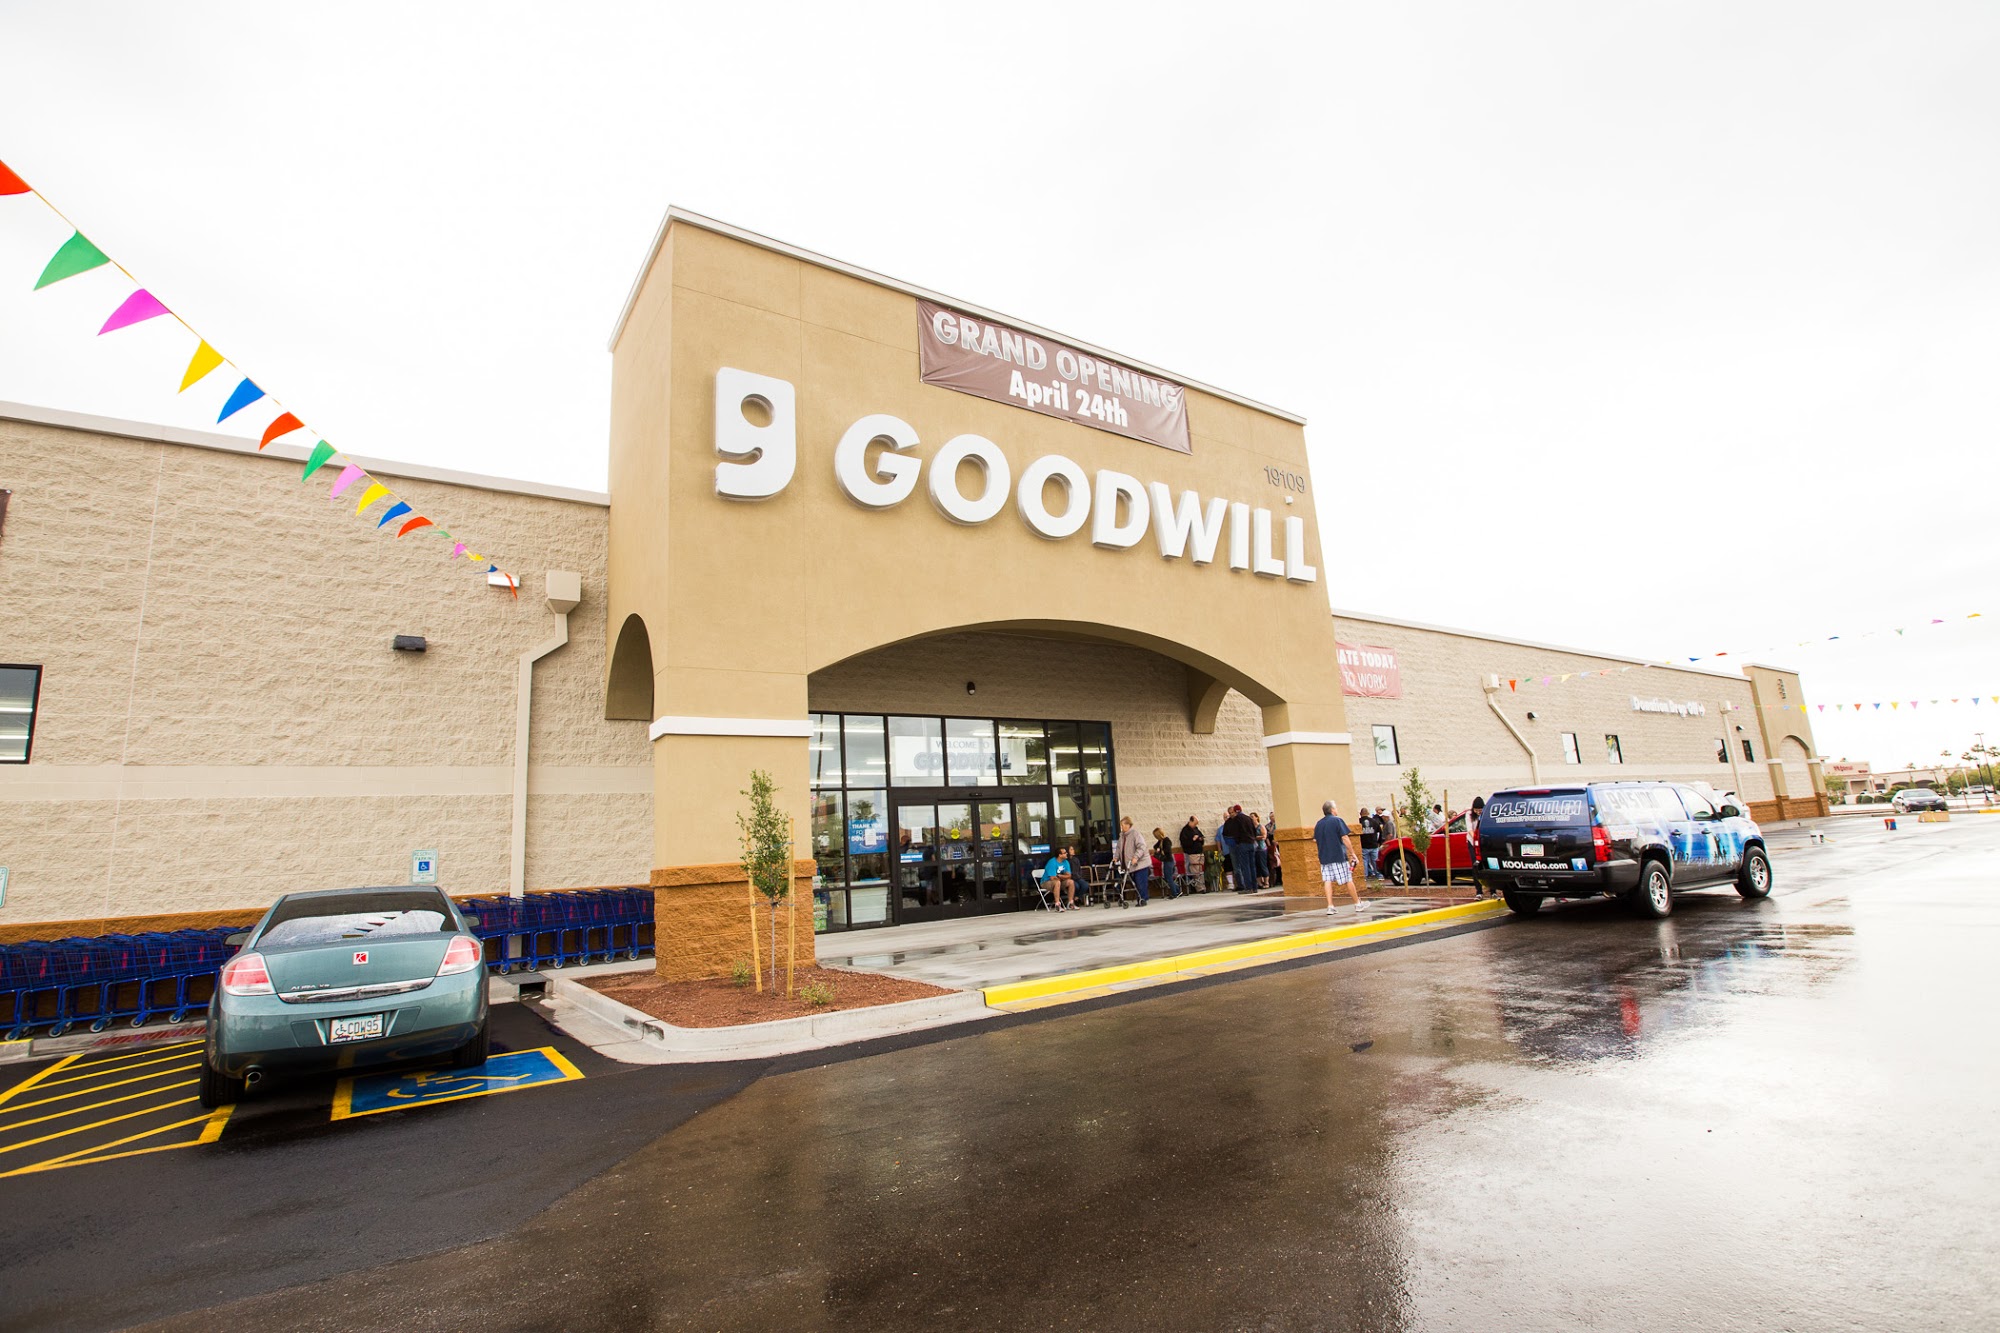 Sundome Goodwill Retail Store and Donation Center